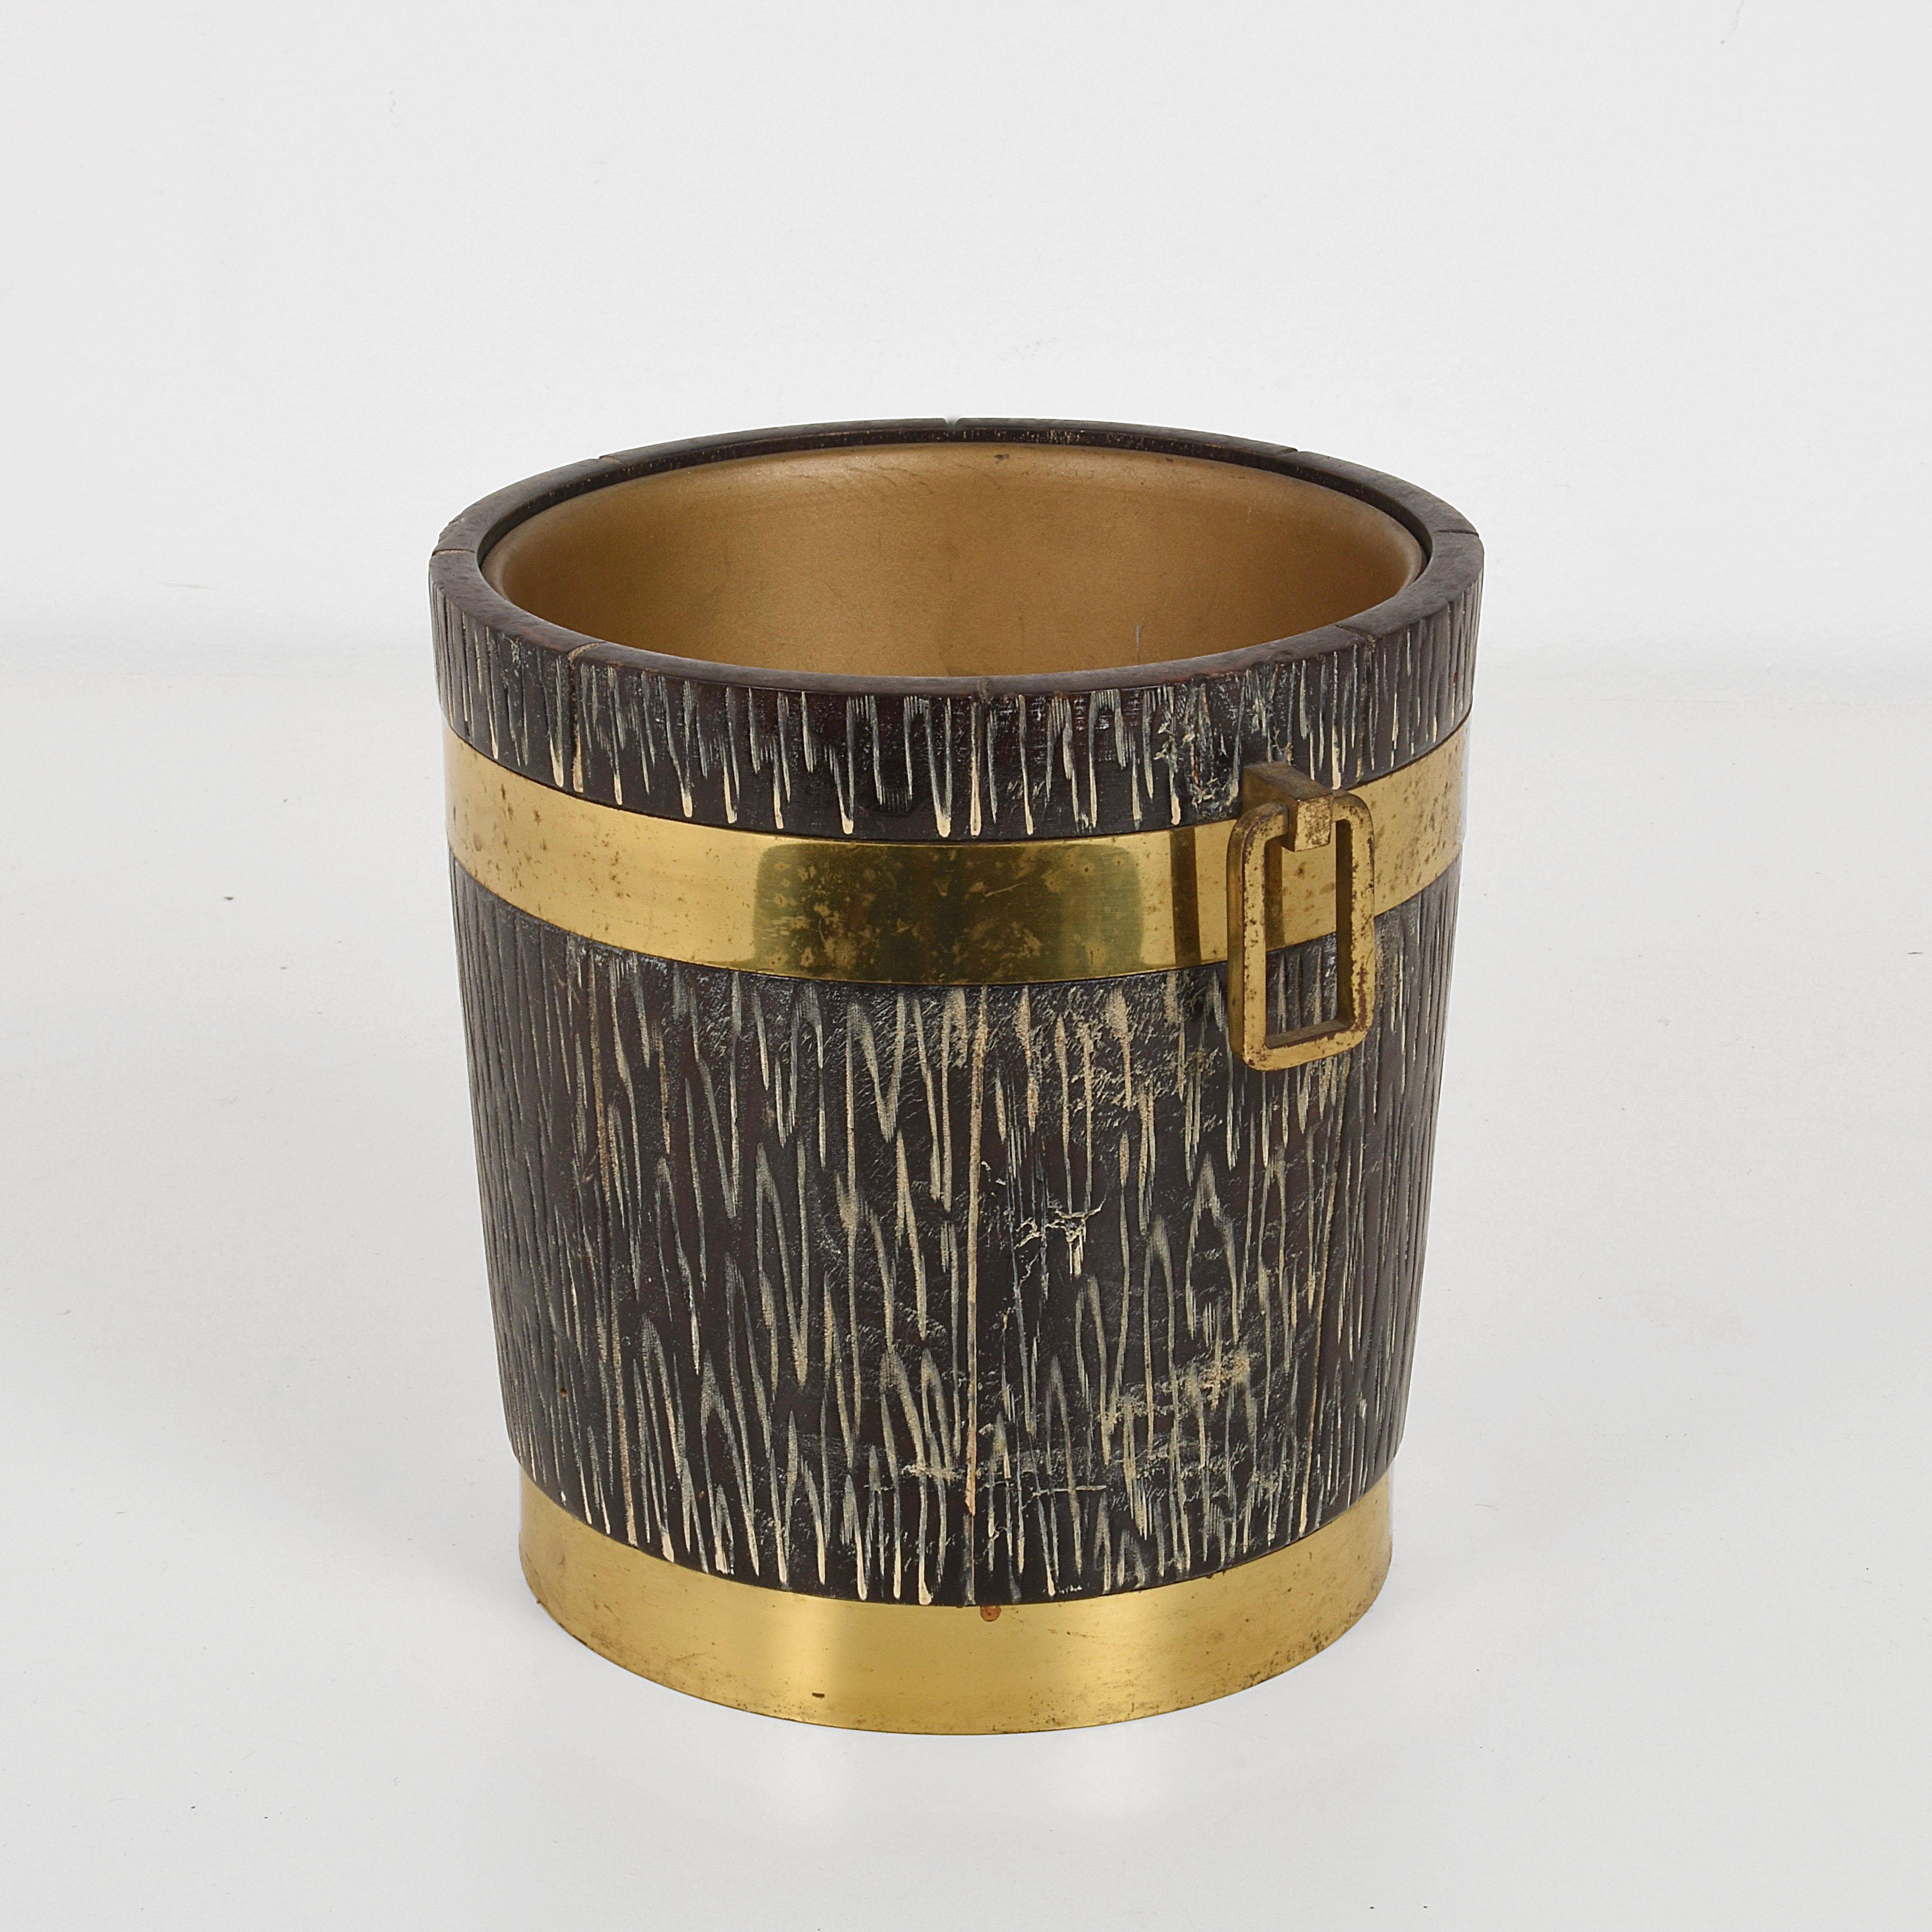 Elegant ice bucket by Aldo Tura for Macabo by Cusano Milanino
Carved wood with brass finishing’s. Golden aluminum tray inside.